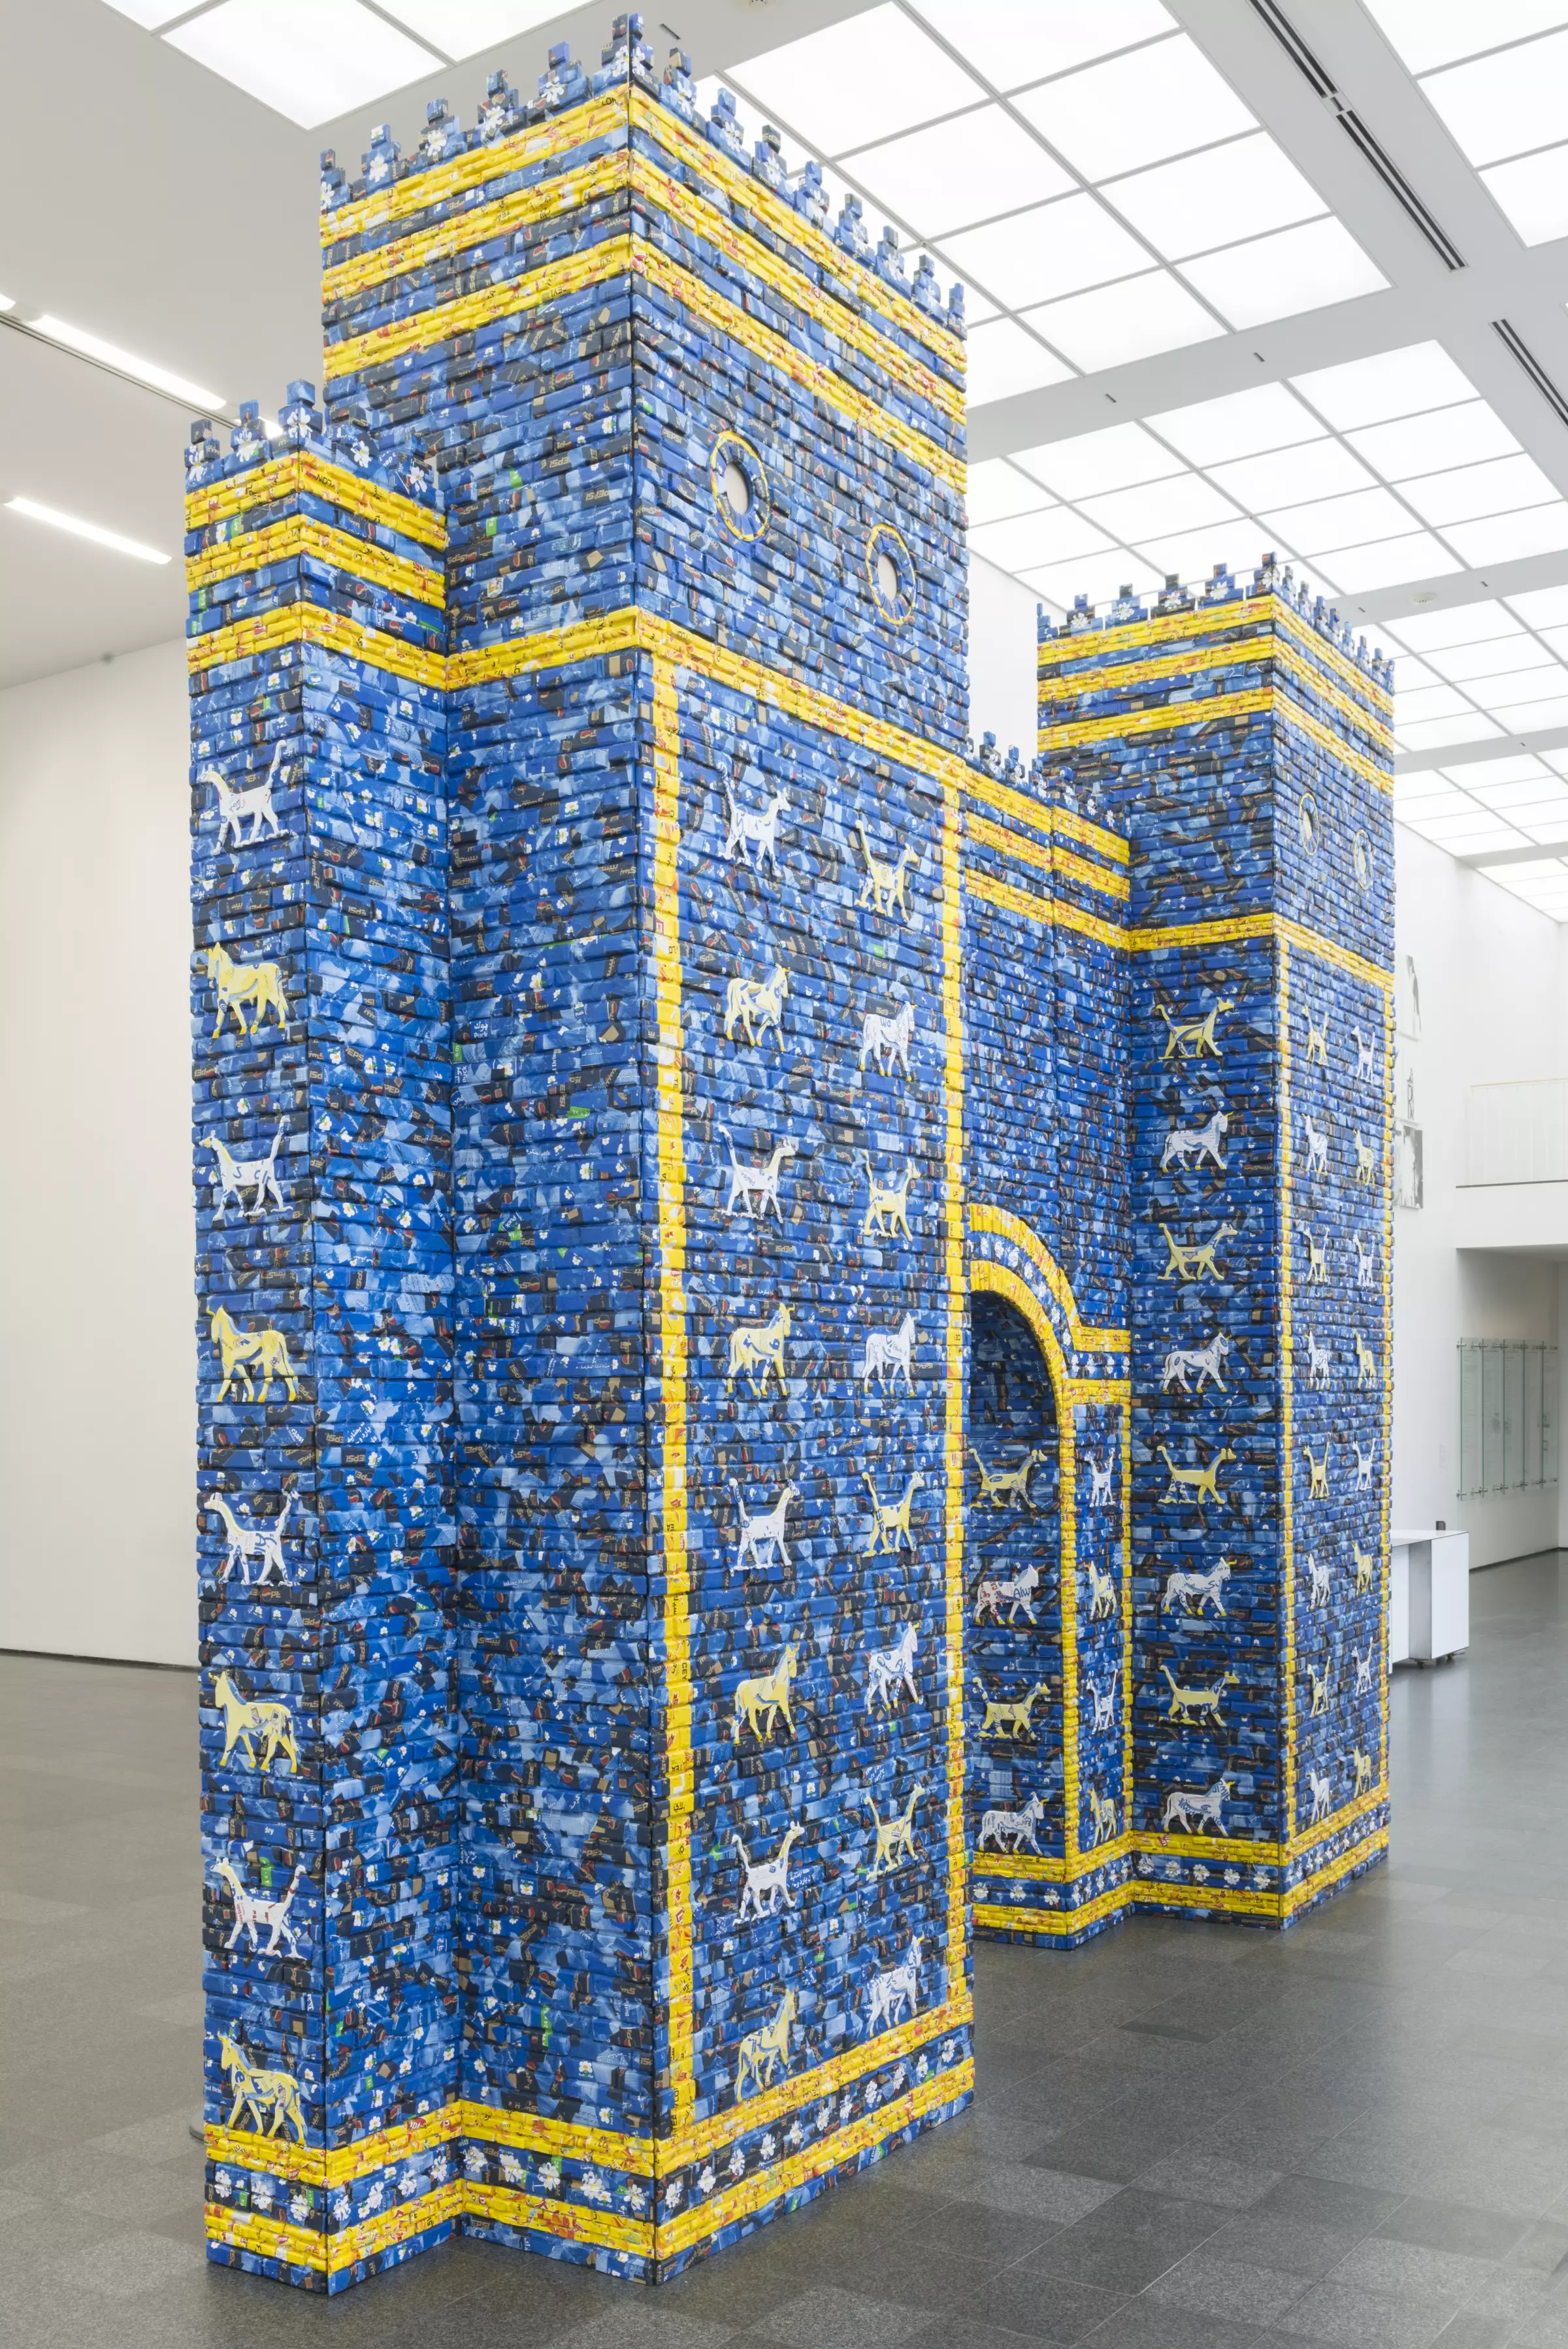 Installation view of a castle facade with crenelations, an arched doorway, and covered with blue tiles with yellow tile–stripes and columns of painted animals.